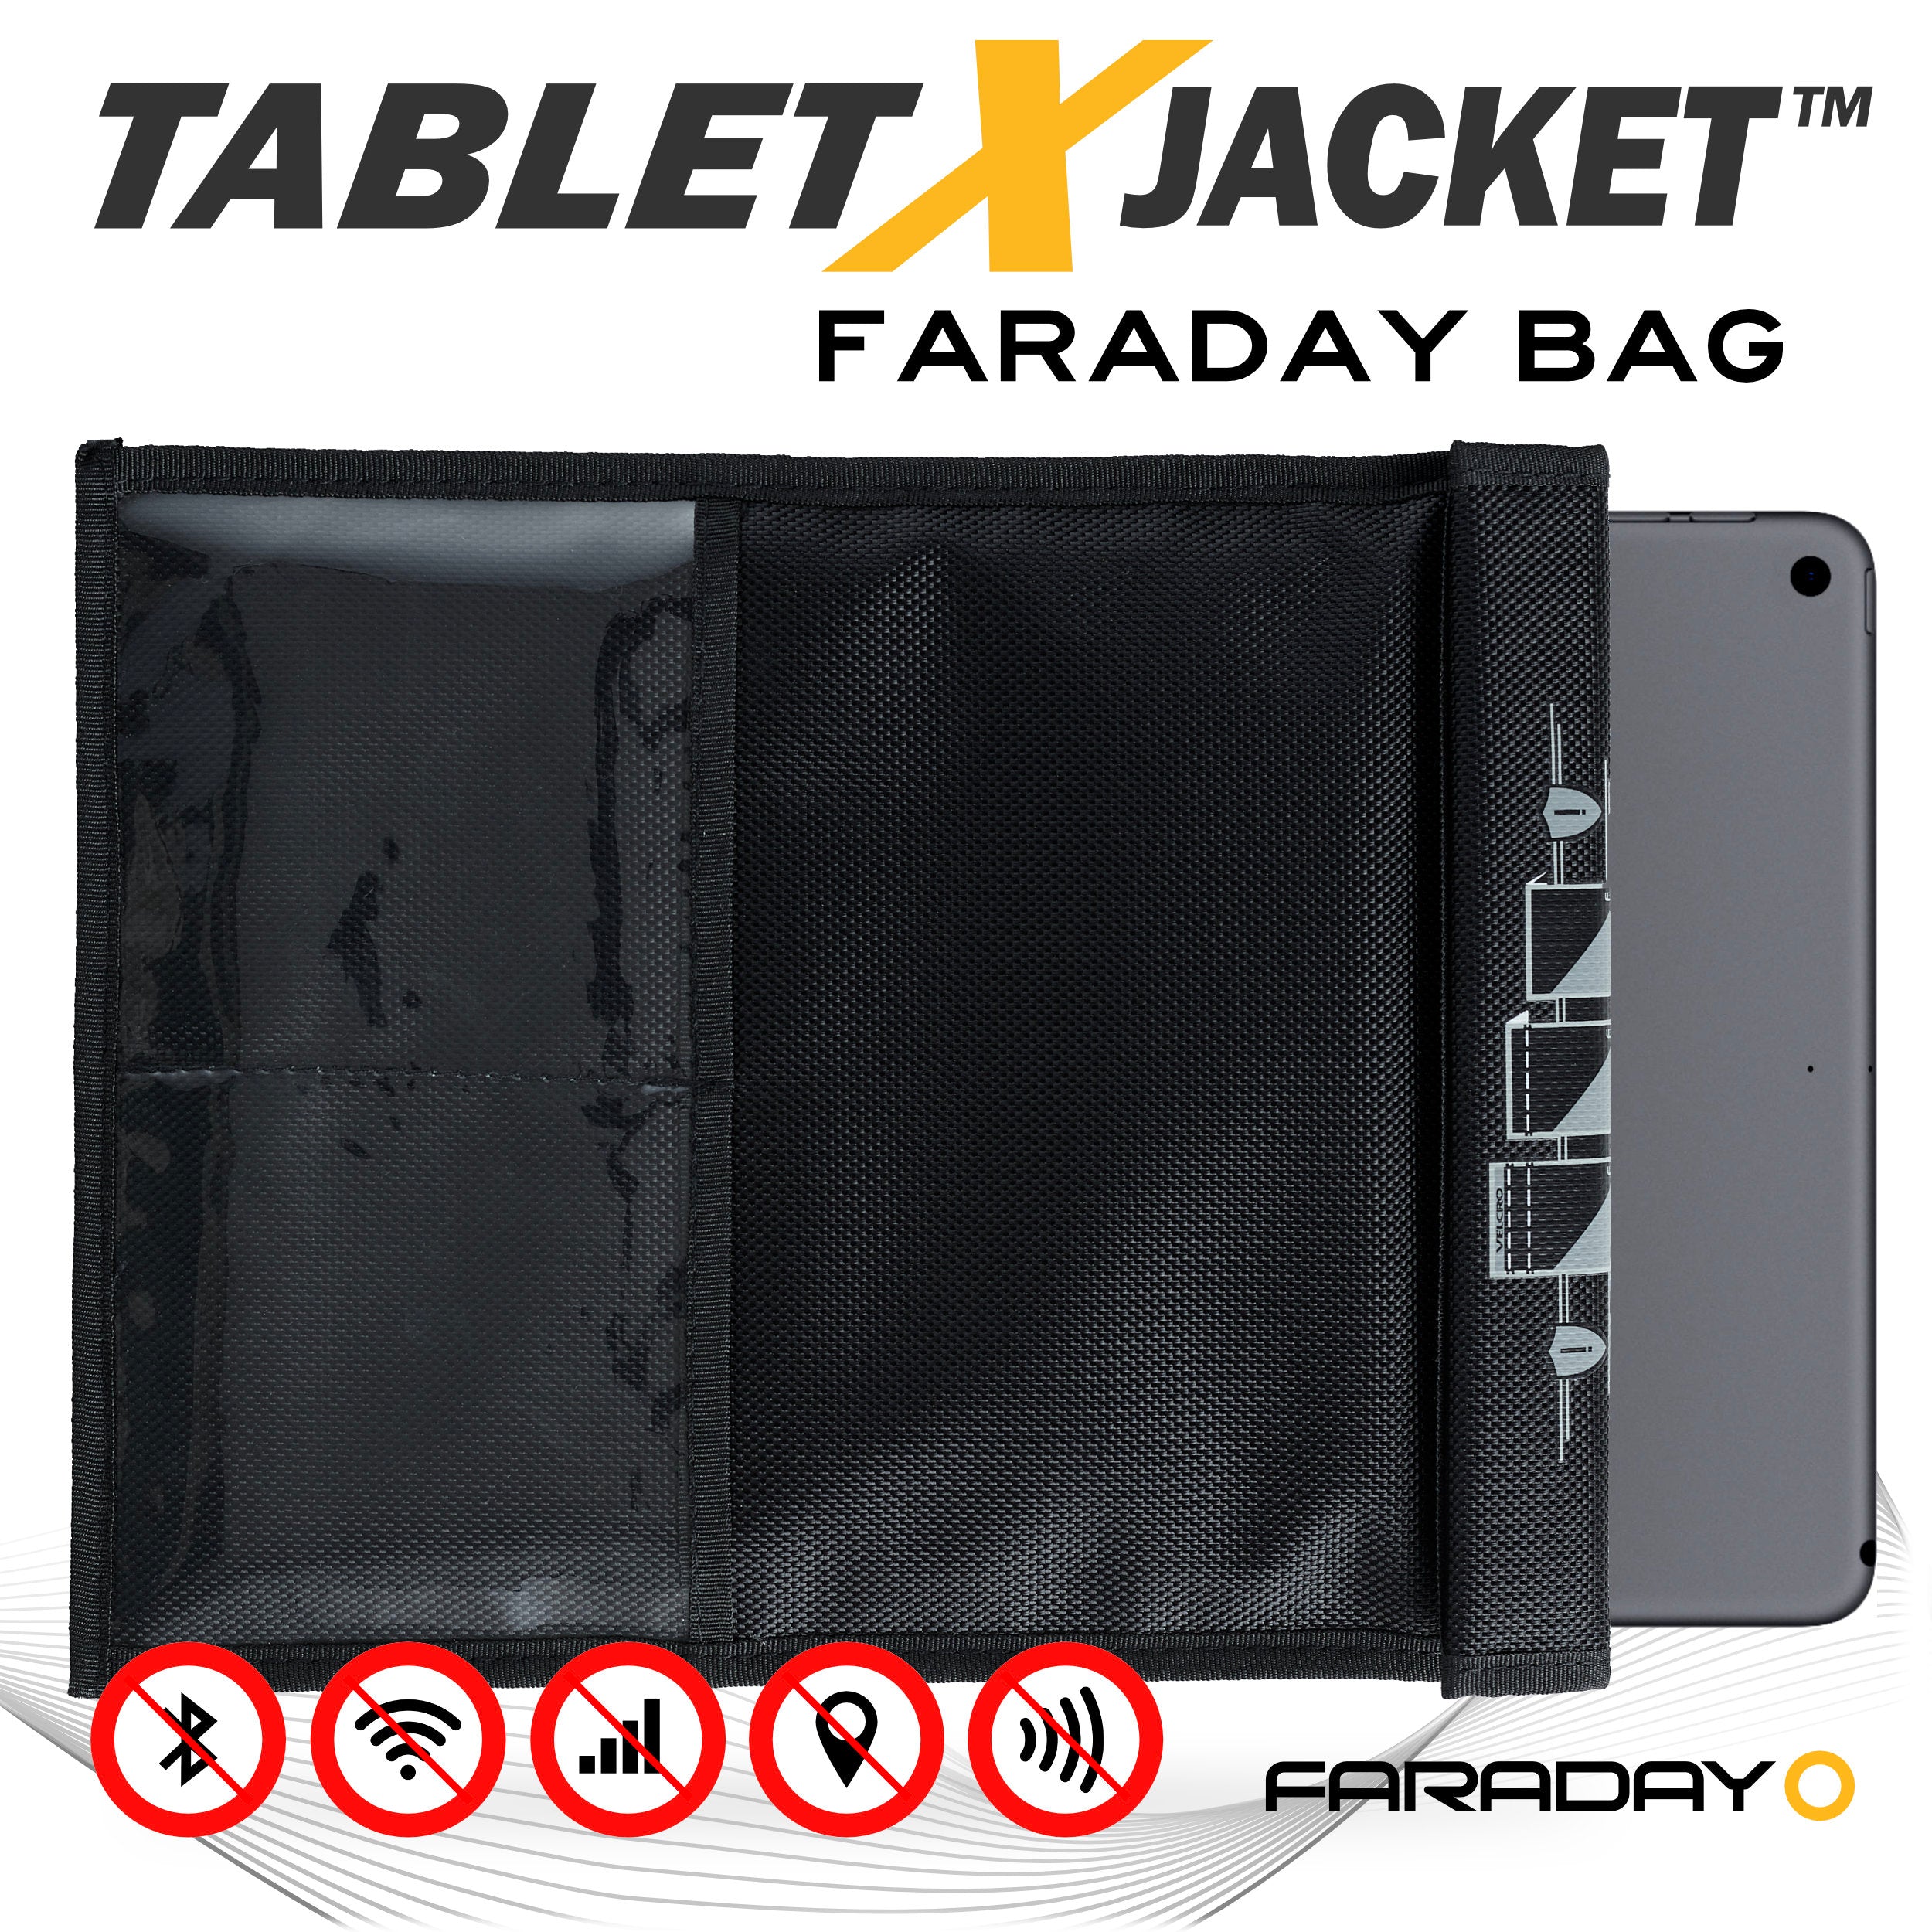 JACKET Forensic Faraday Cell Phone Bag (4.5 x 8)